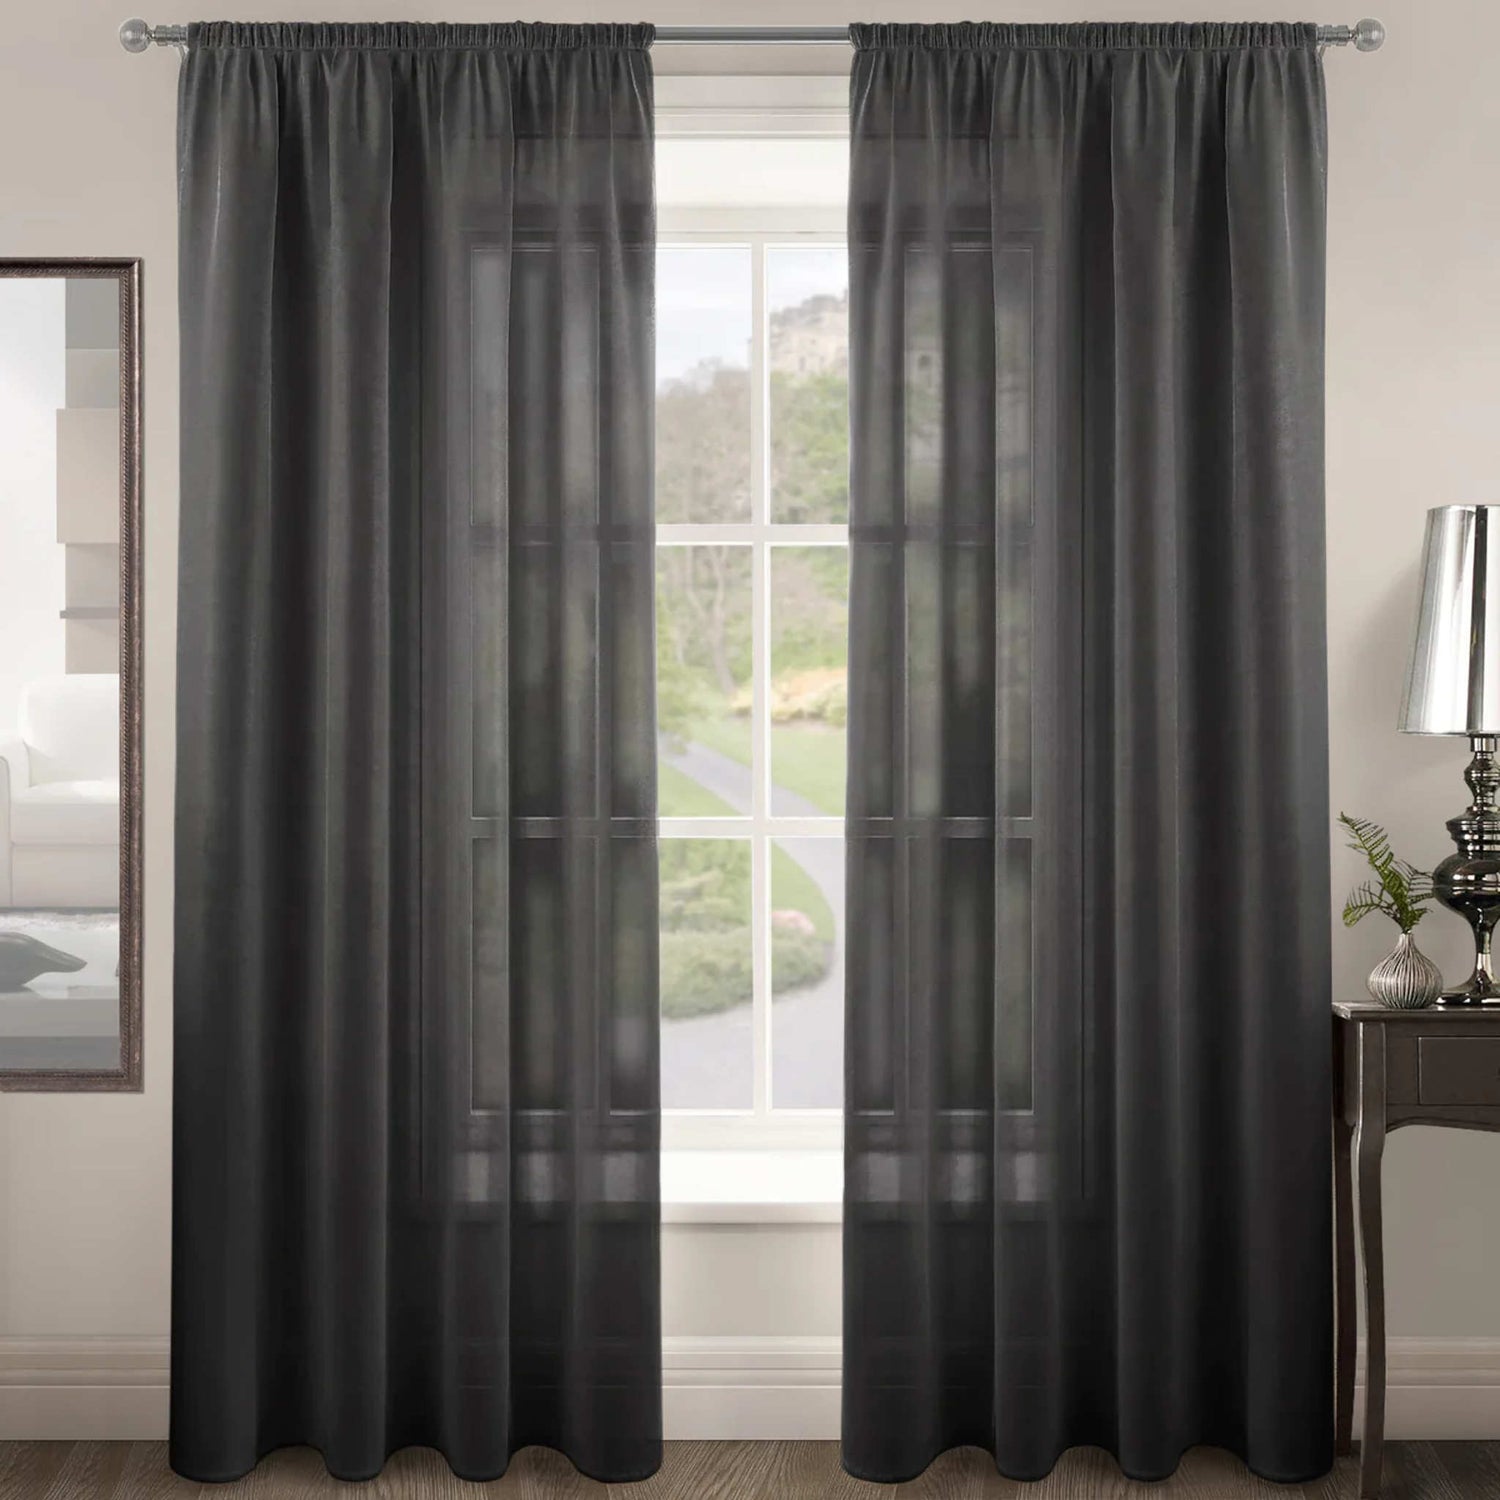 Intimates Riva Voile Panels Tape Top Curtains | 59x54in